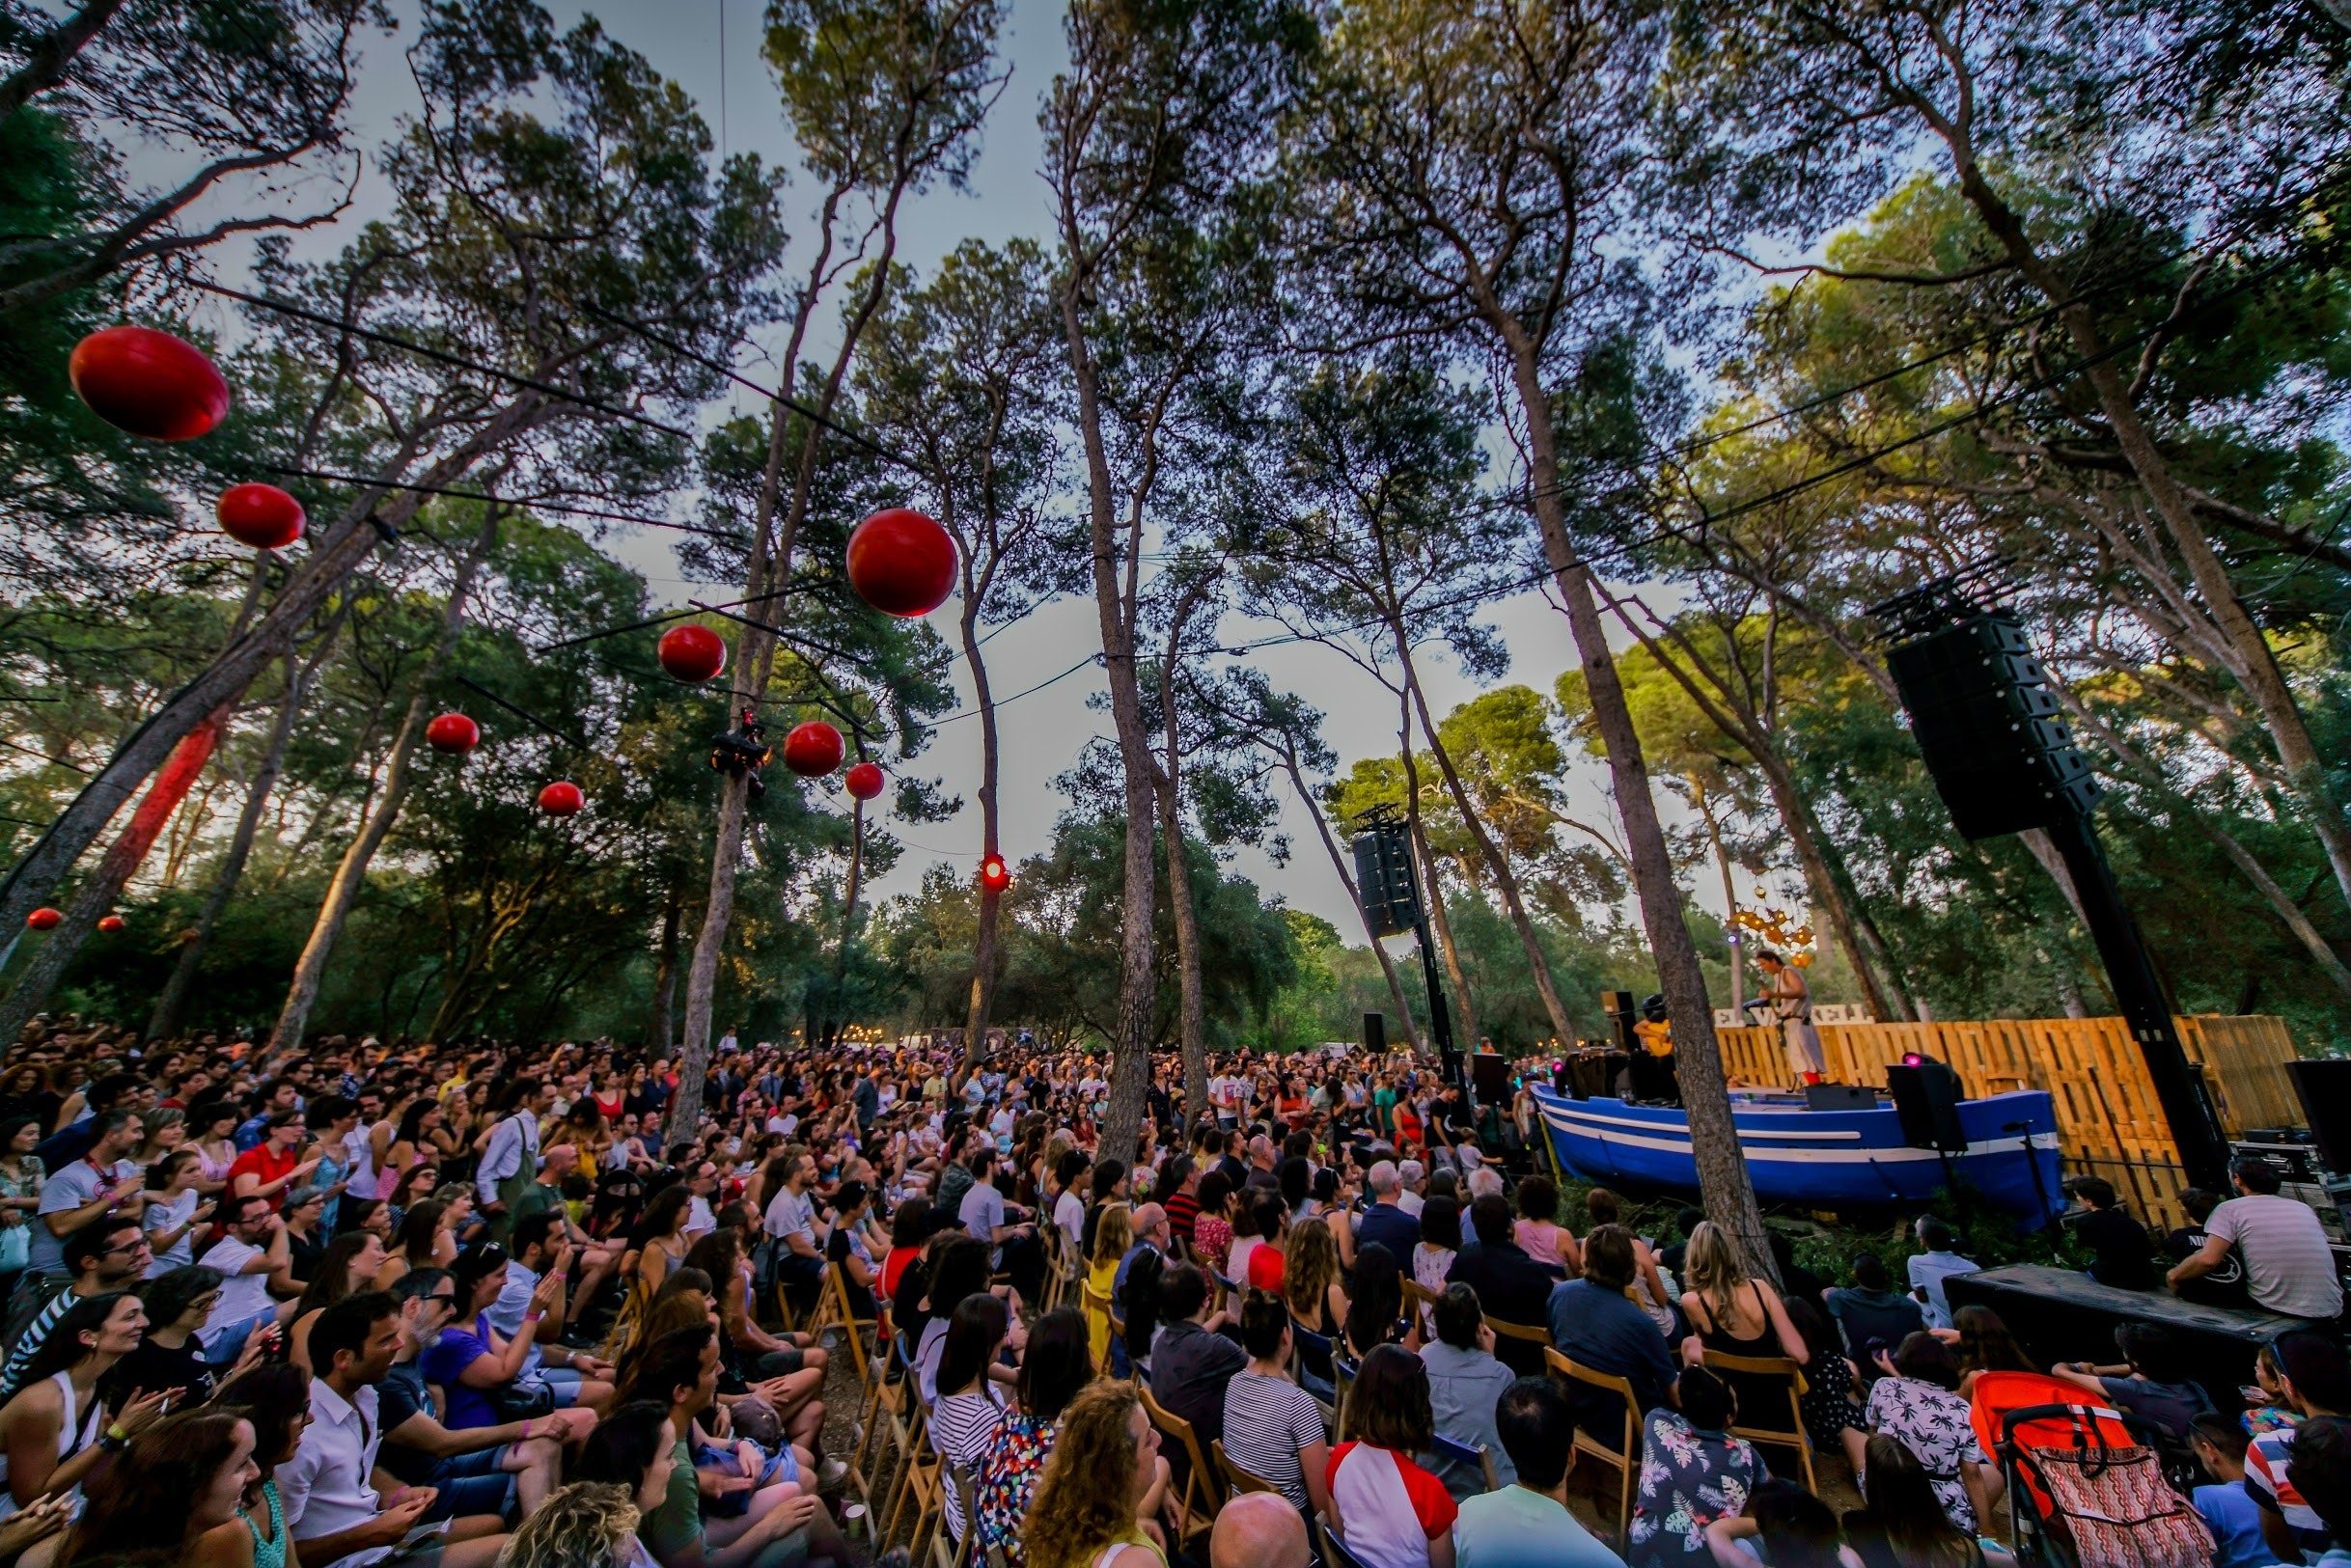 A large crowd of people sitting amidst tall trees, watching a performer at Vida Festival in Spain.